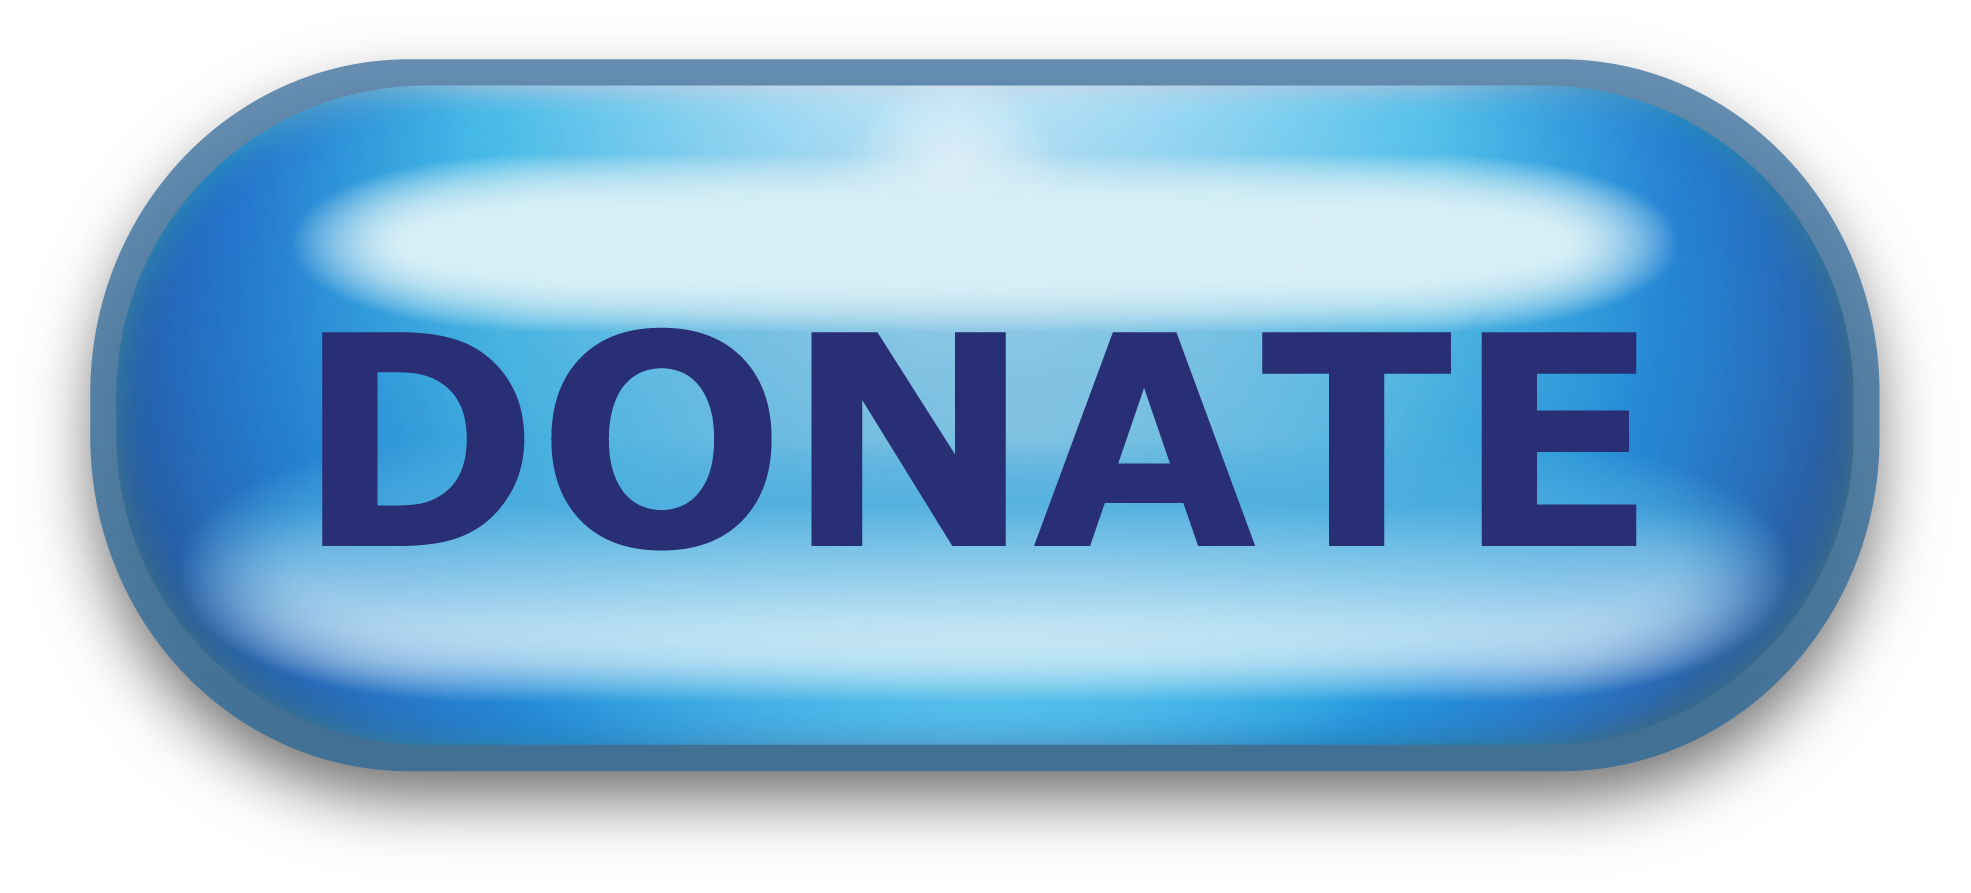 donate-button-image-7.png